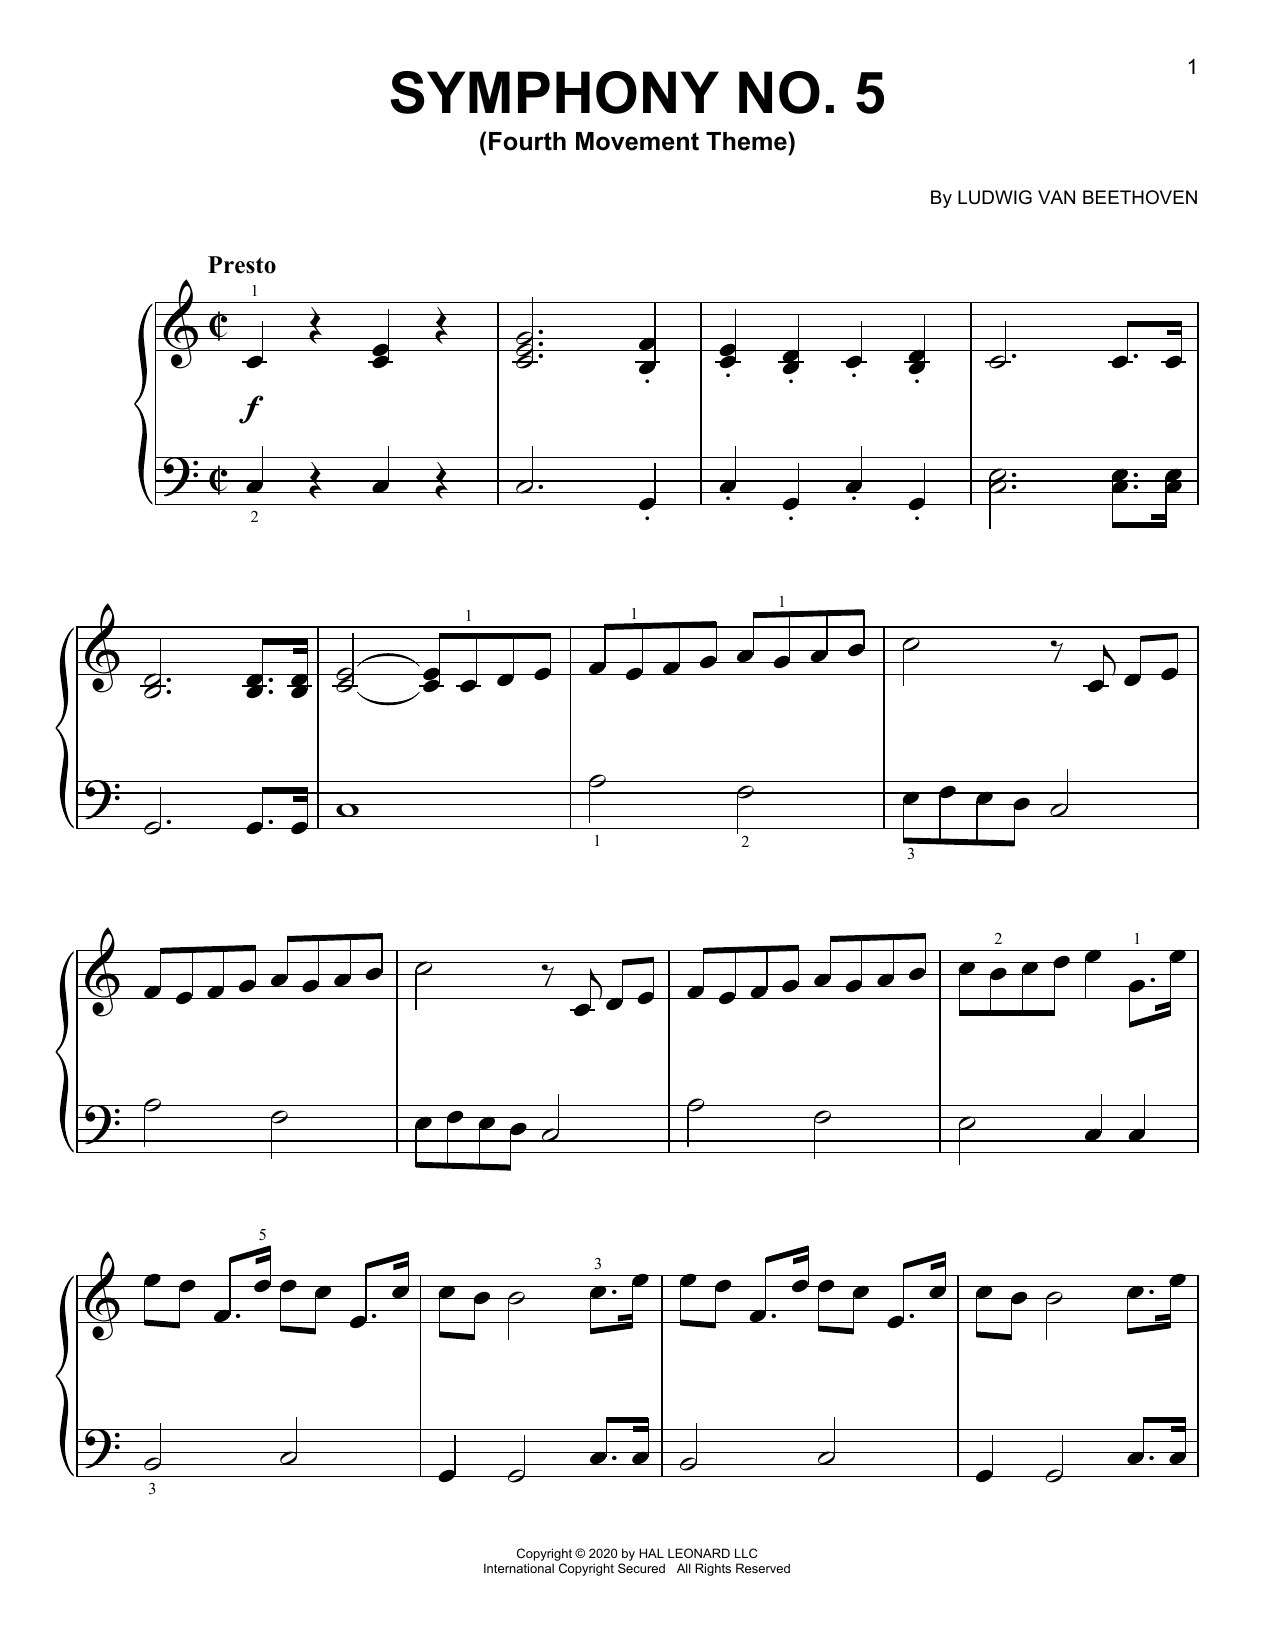 Ludwig van Beethoven Symphony No. 5, Fourth Movement Excerpt sheet music preview music notes and score for Easy Piano including 2 page(s)